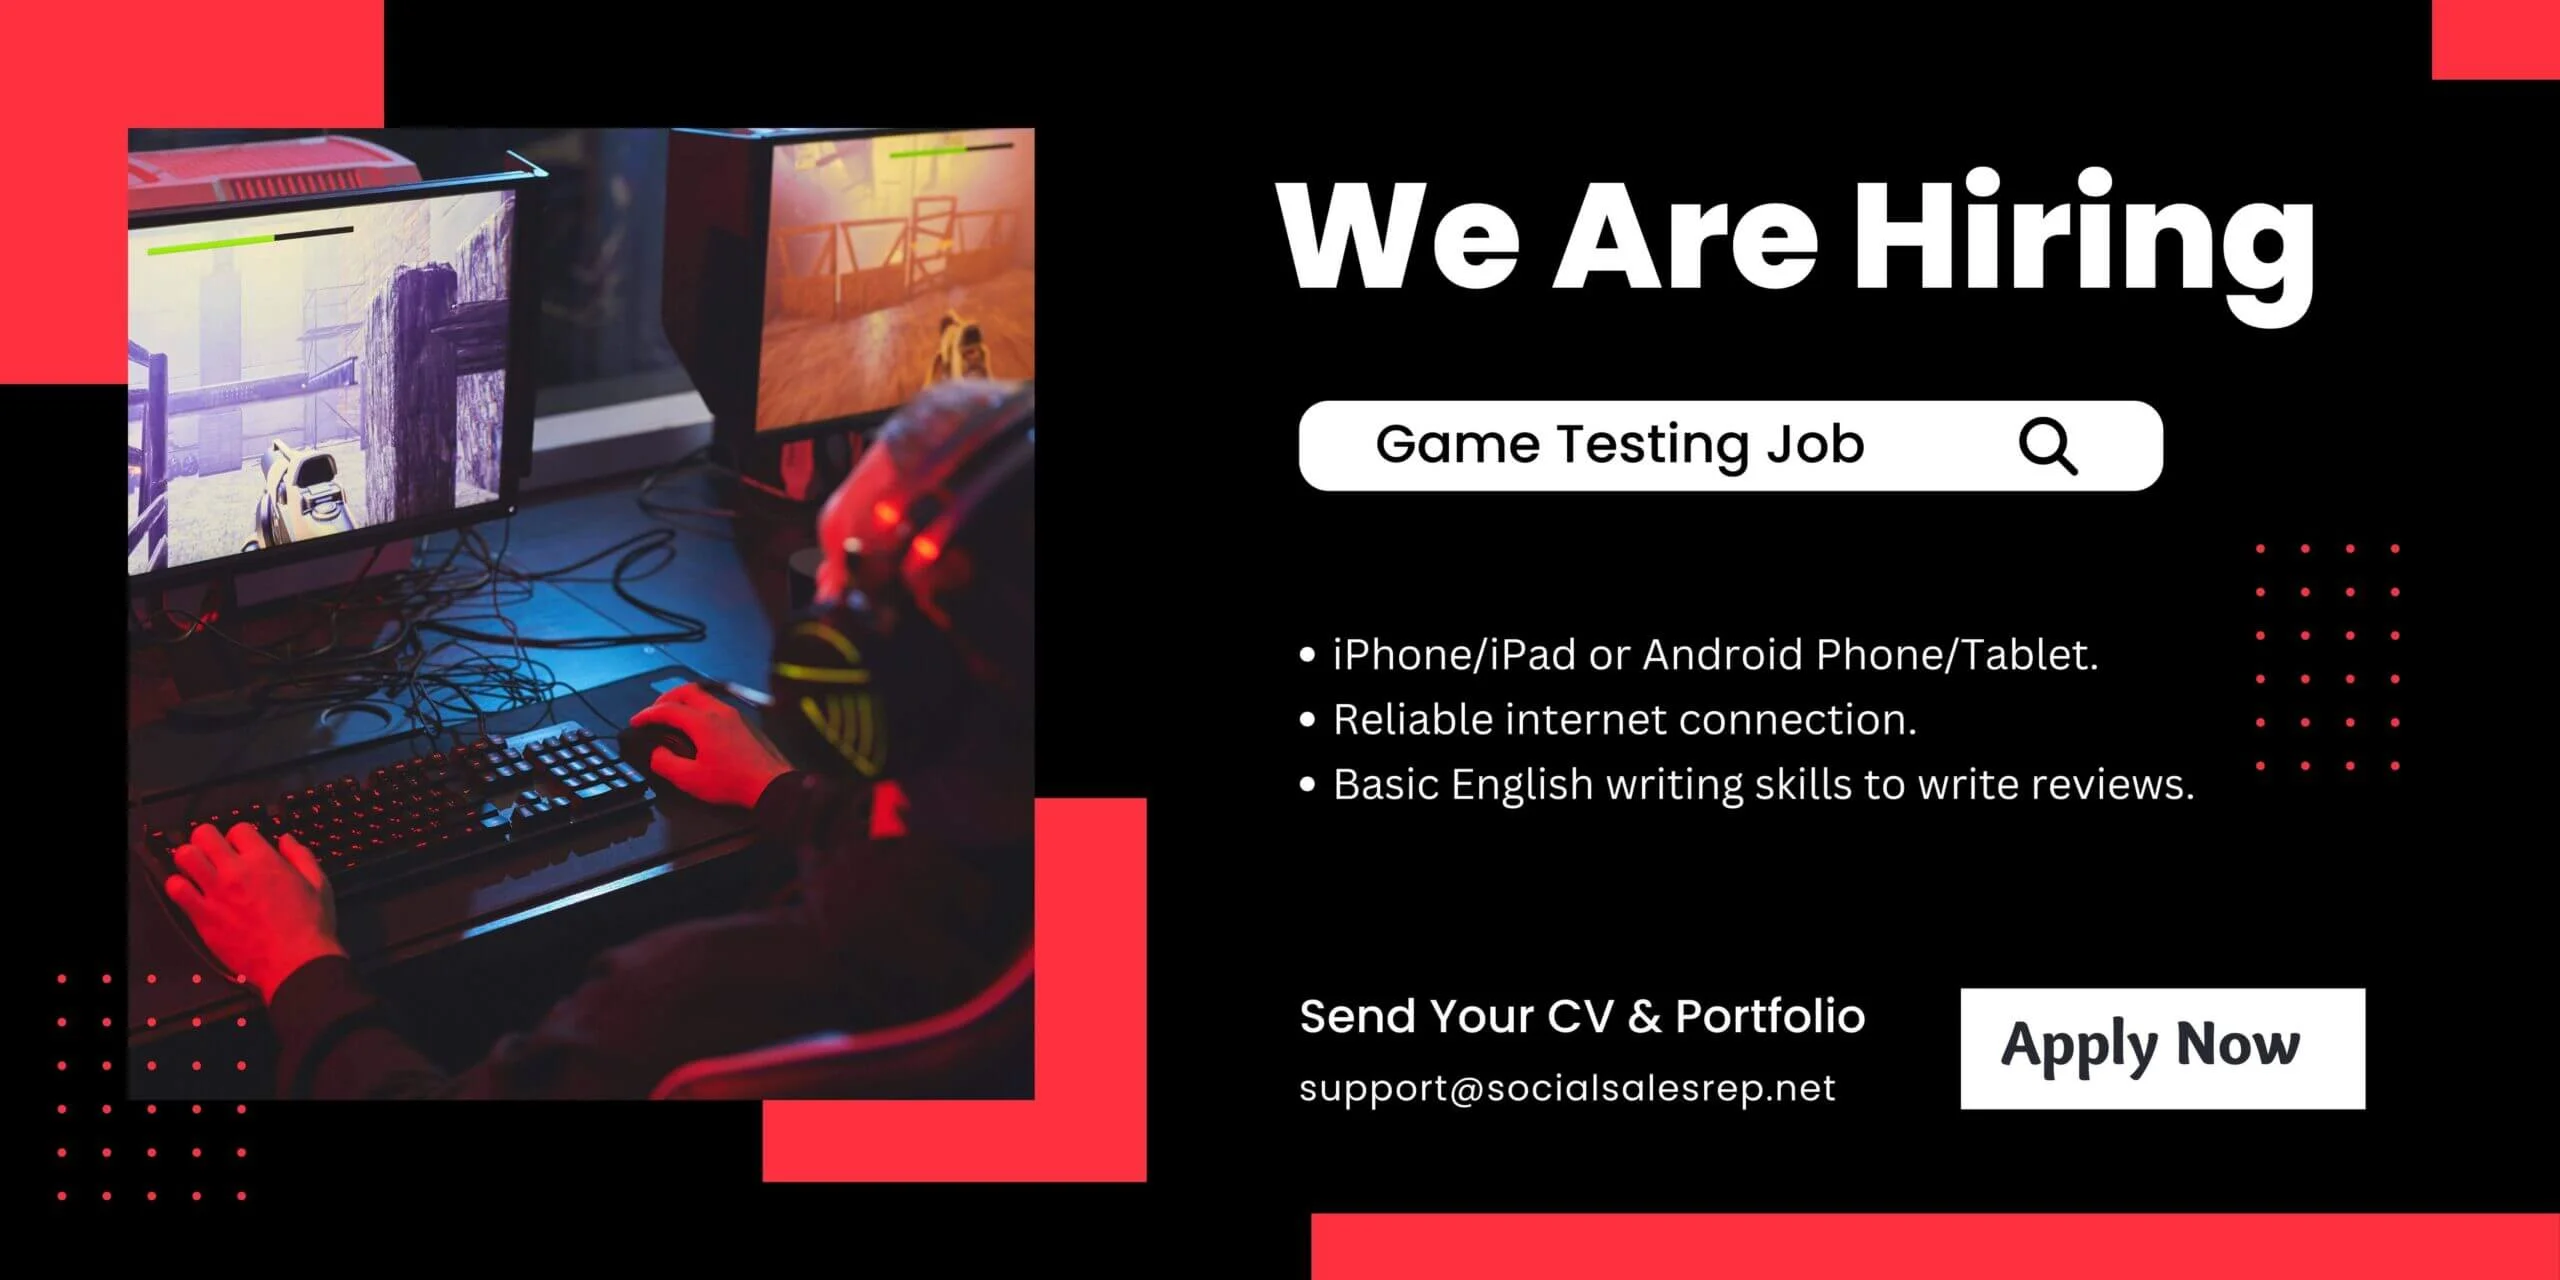 video game tester jobs get paid to play games